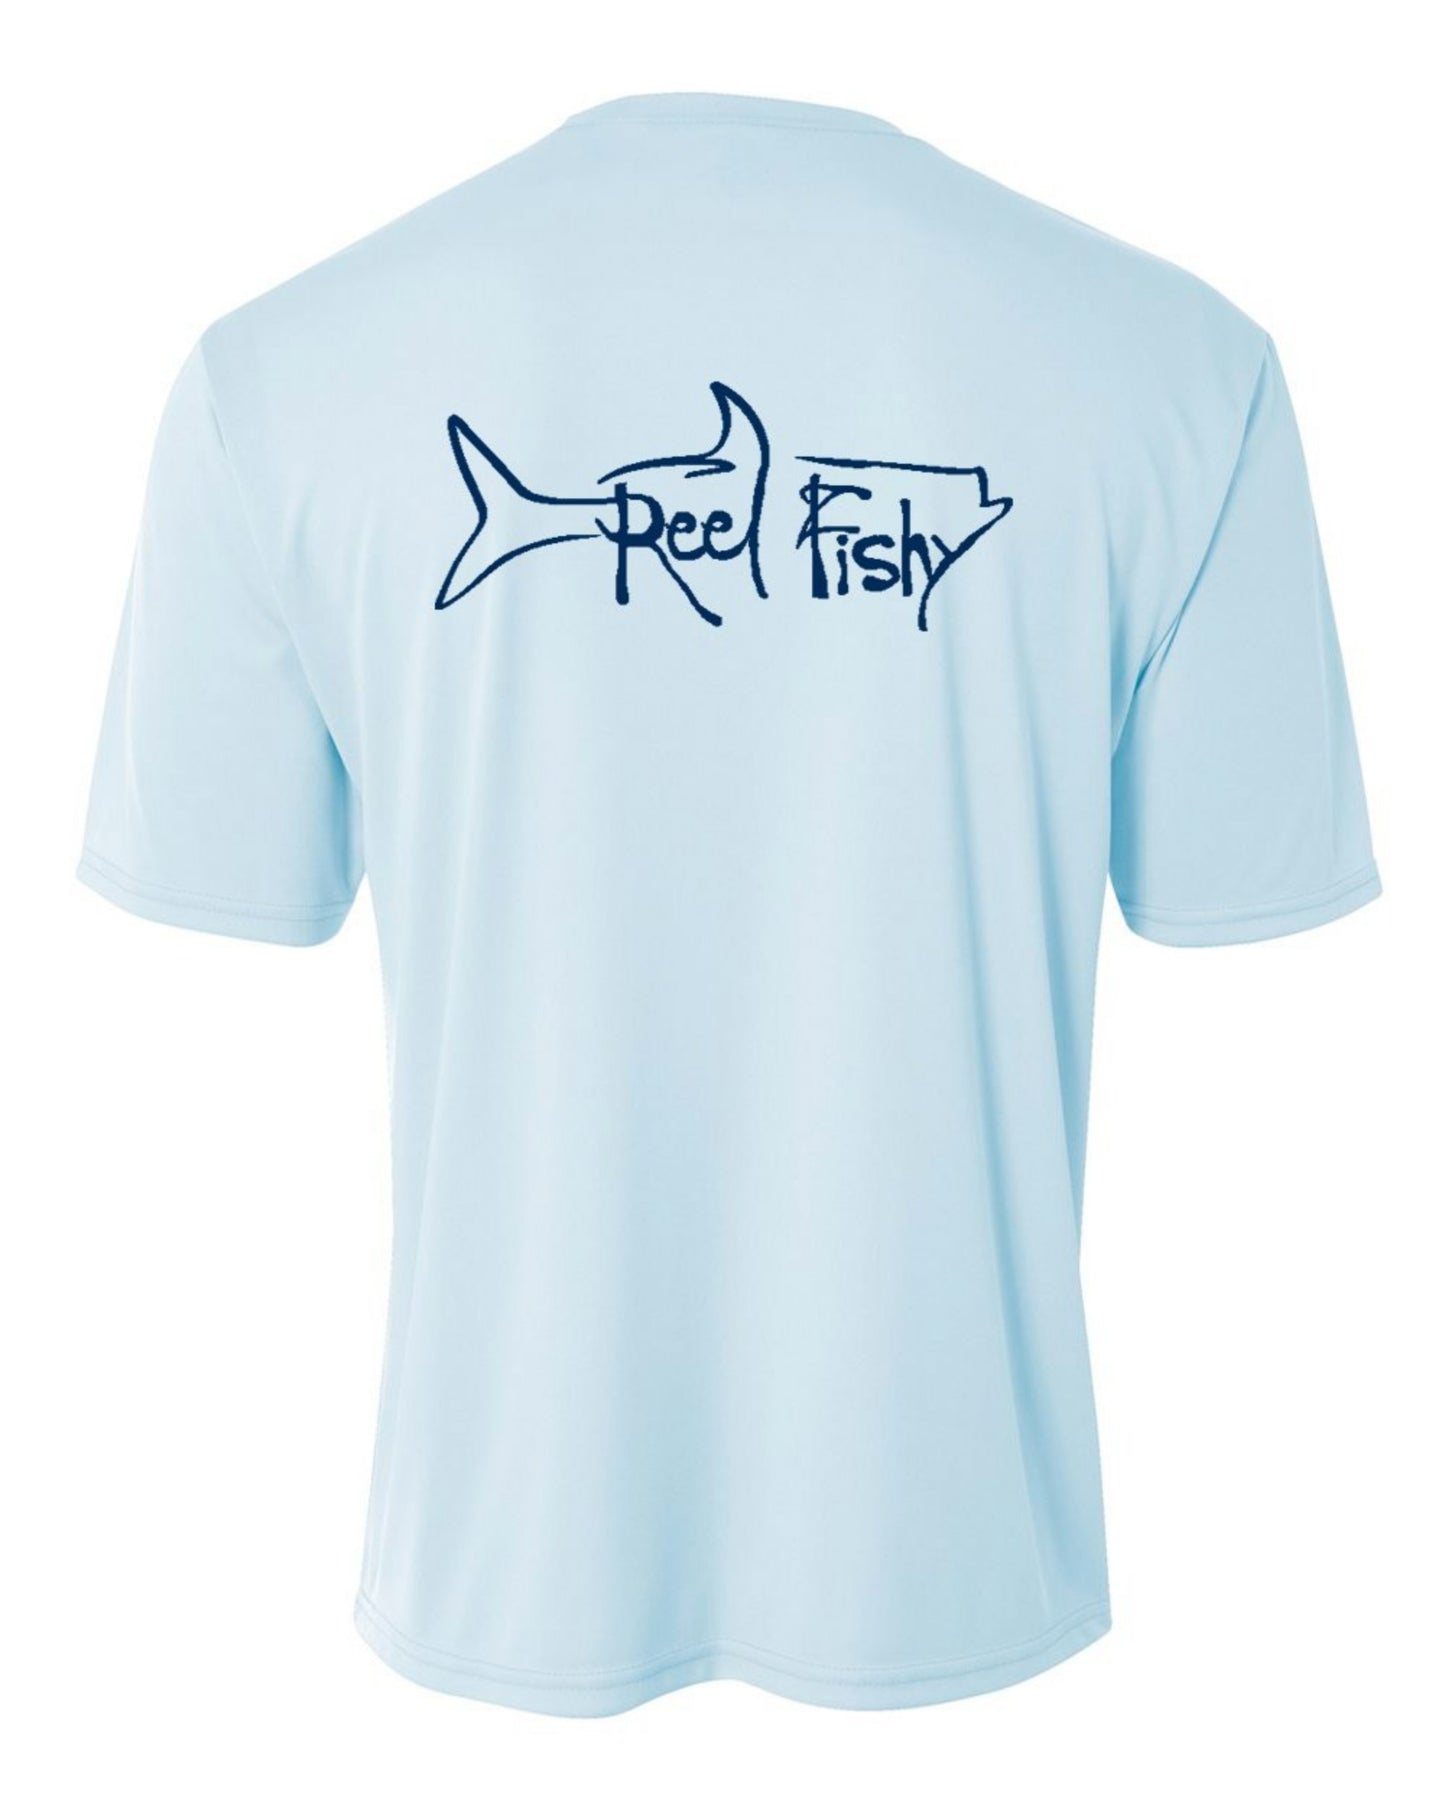 Youth Performance Dry-Fit Tarpon Fishing Shirts with Sun Protection by Reel Fishy Apparel - Short Sleeve Pastel Blue